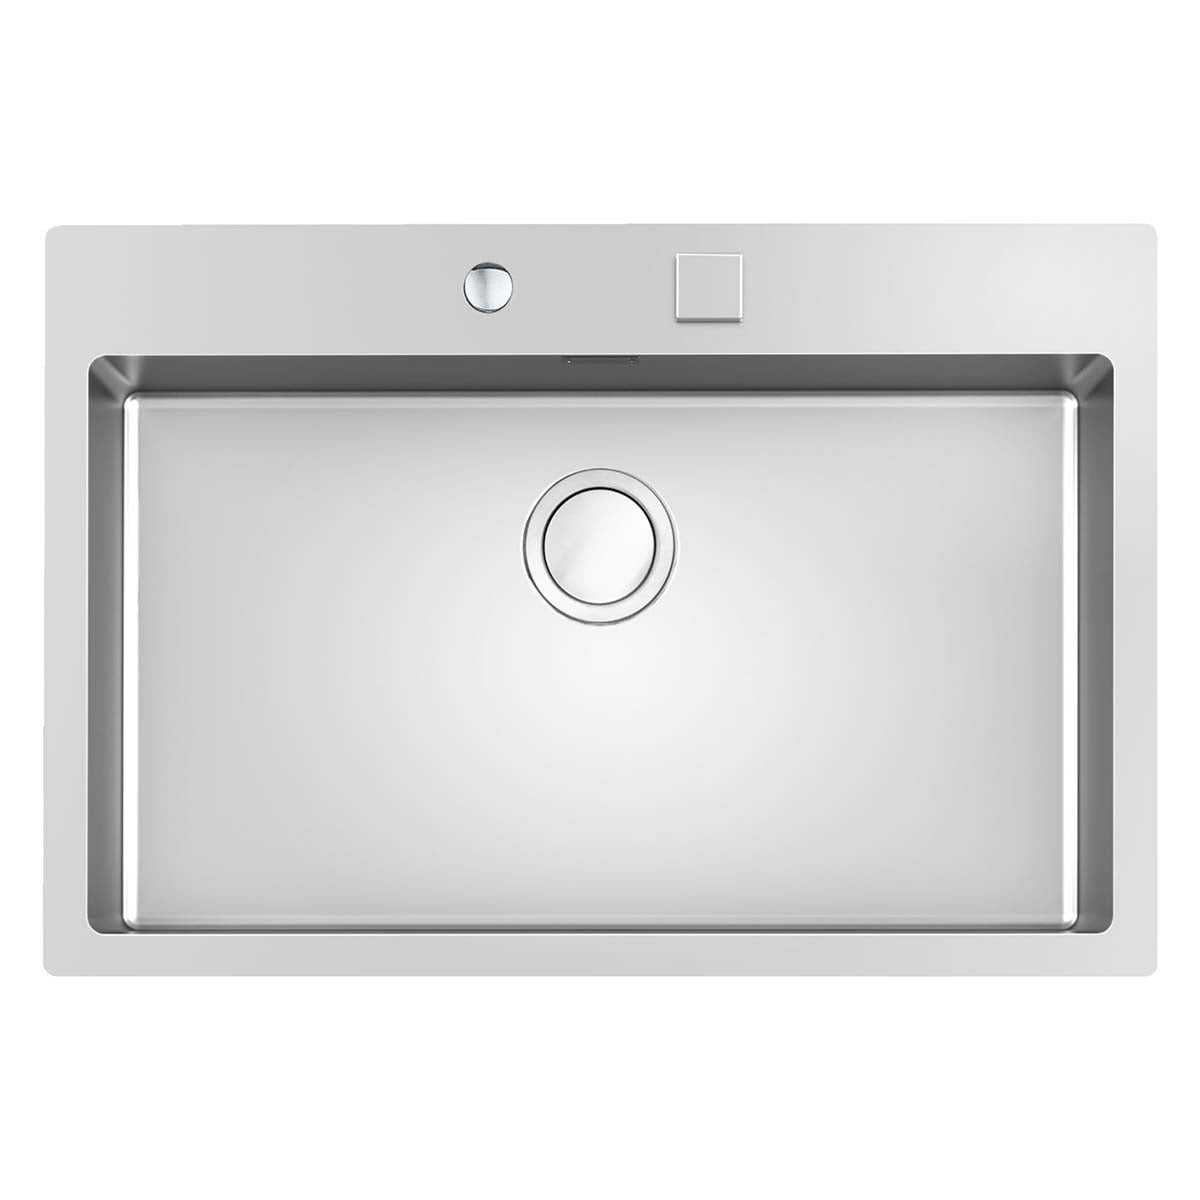 Foster S4001 Filotop Kitchen Sink 710x400mm Brushed Stainless Steel